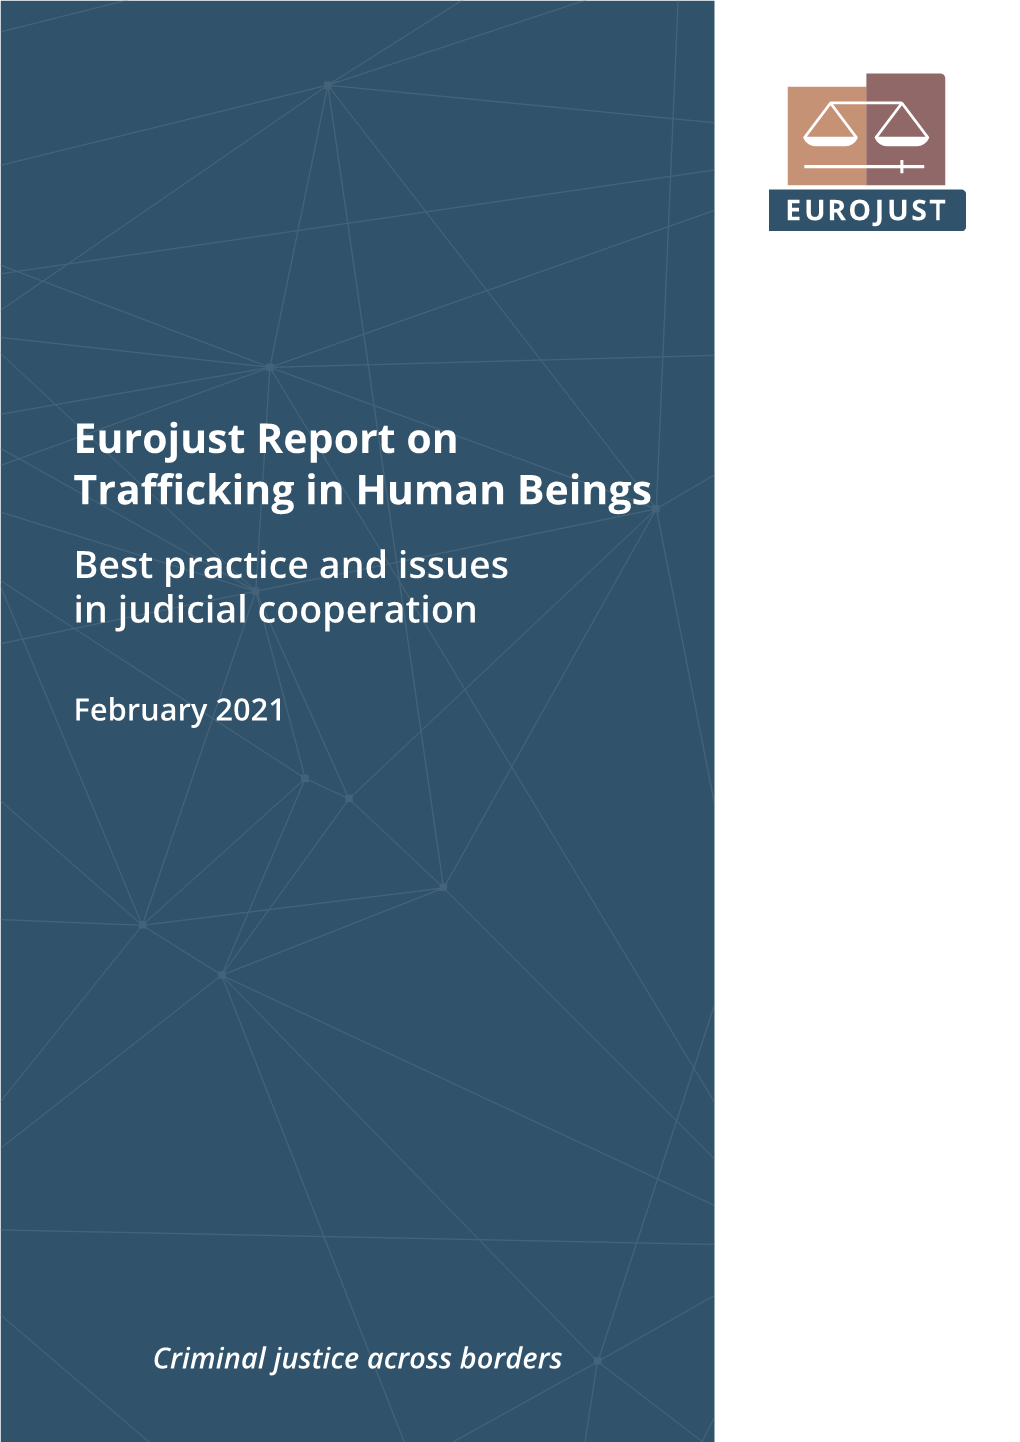 Eurojust Report on Trafficking in Human Beings Best Practice and Issues in Judicial Cooperation